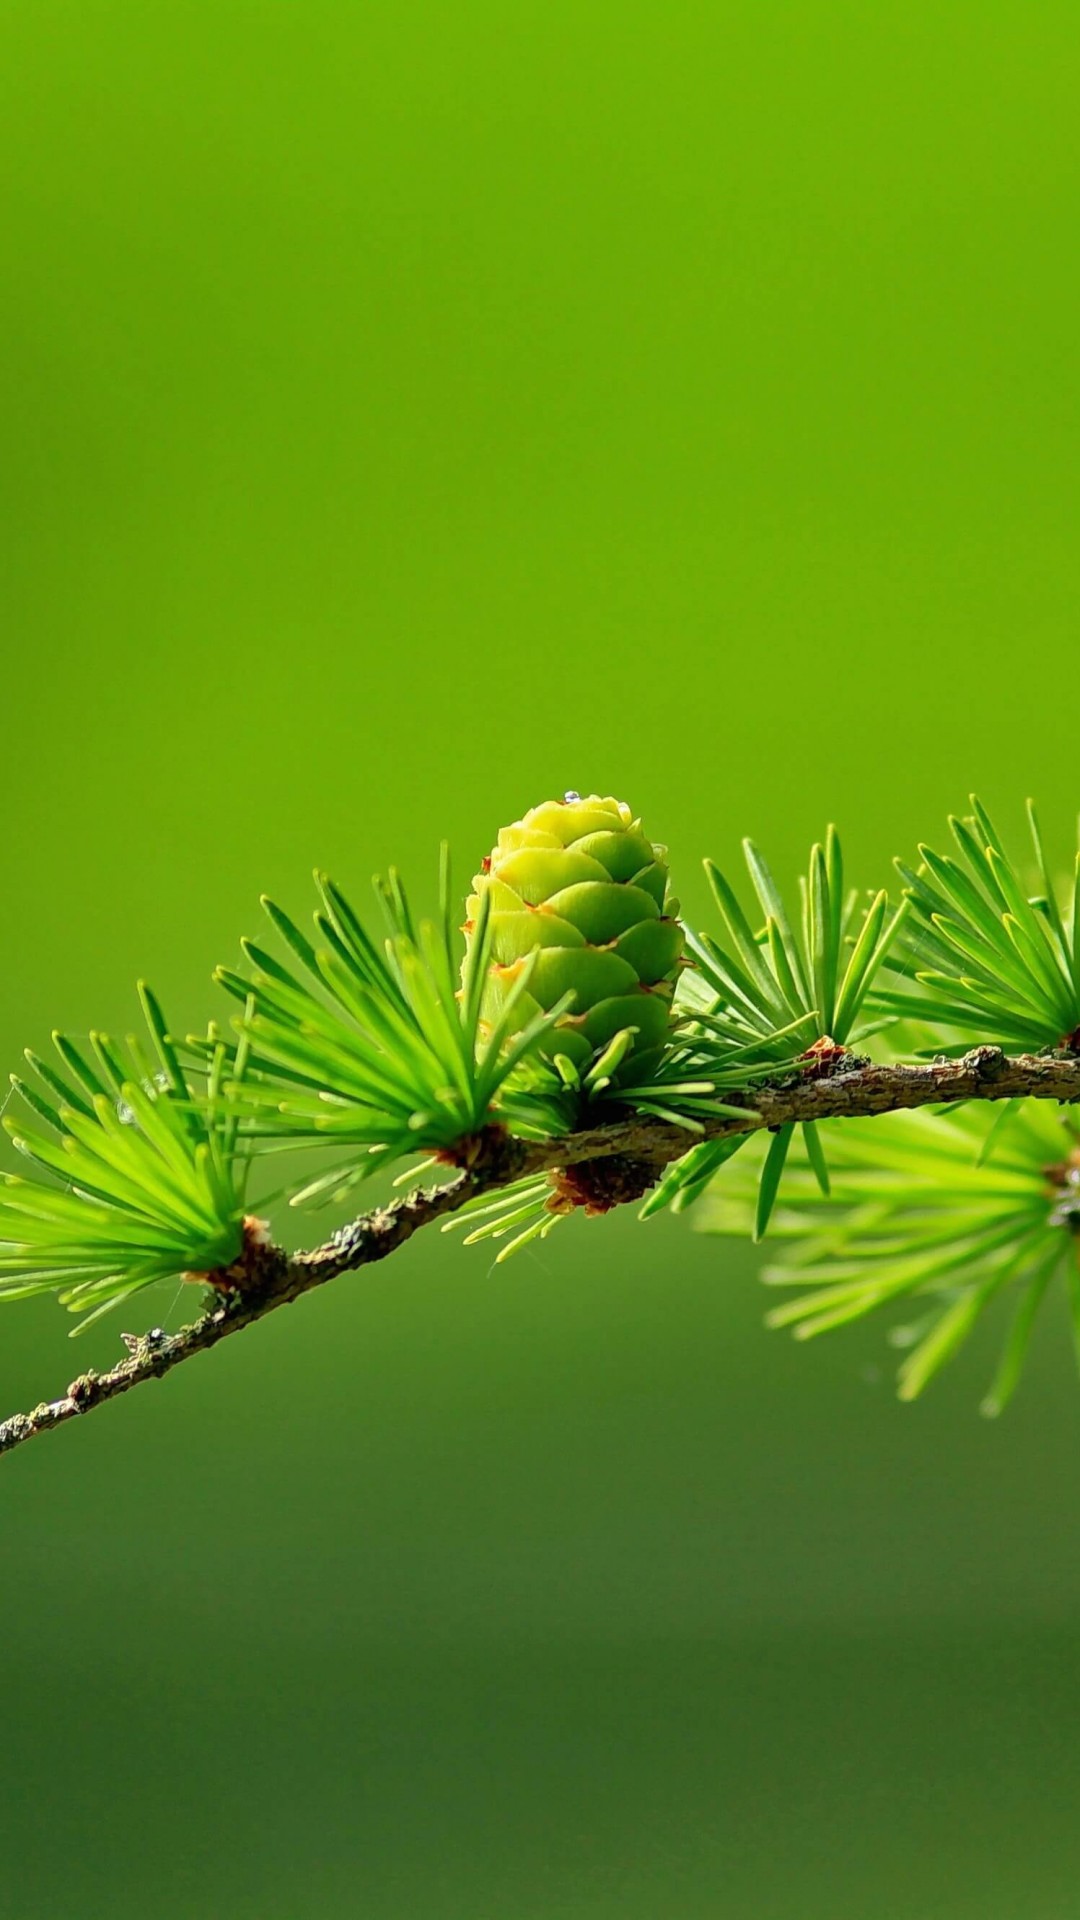 Branch of Pine Tree Wallpaper for SONY Xperia Z2